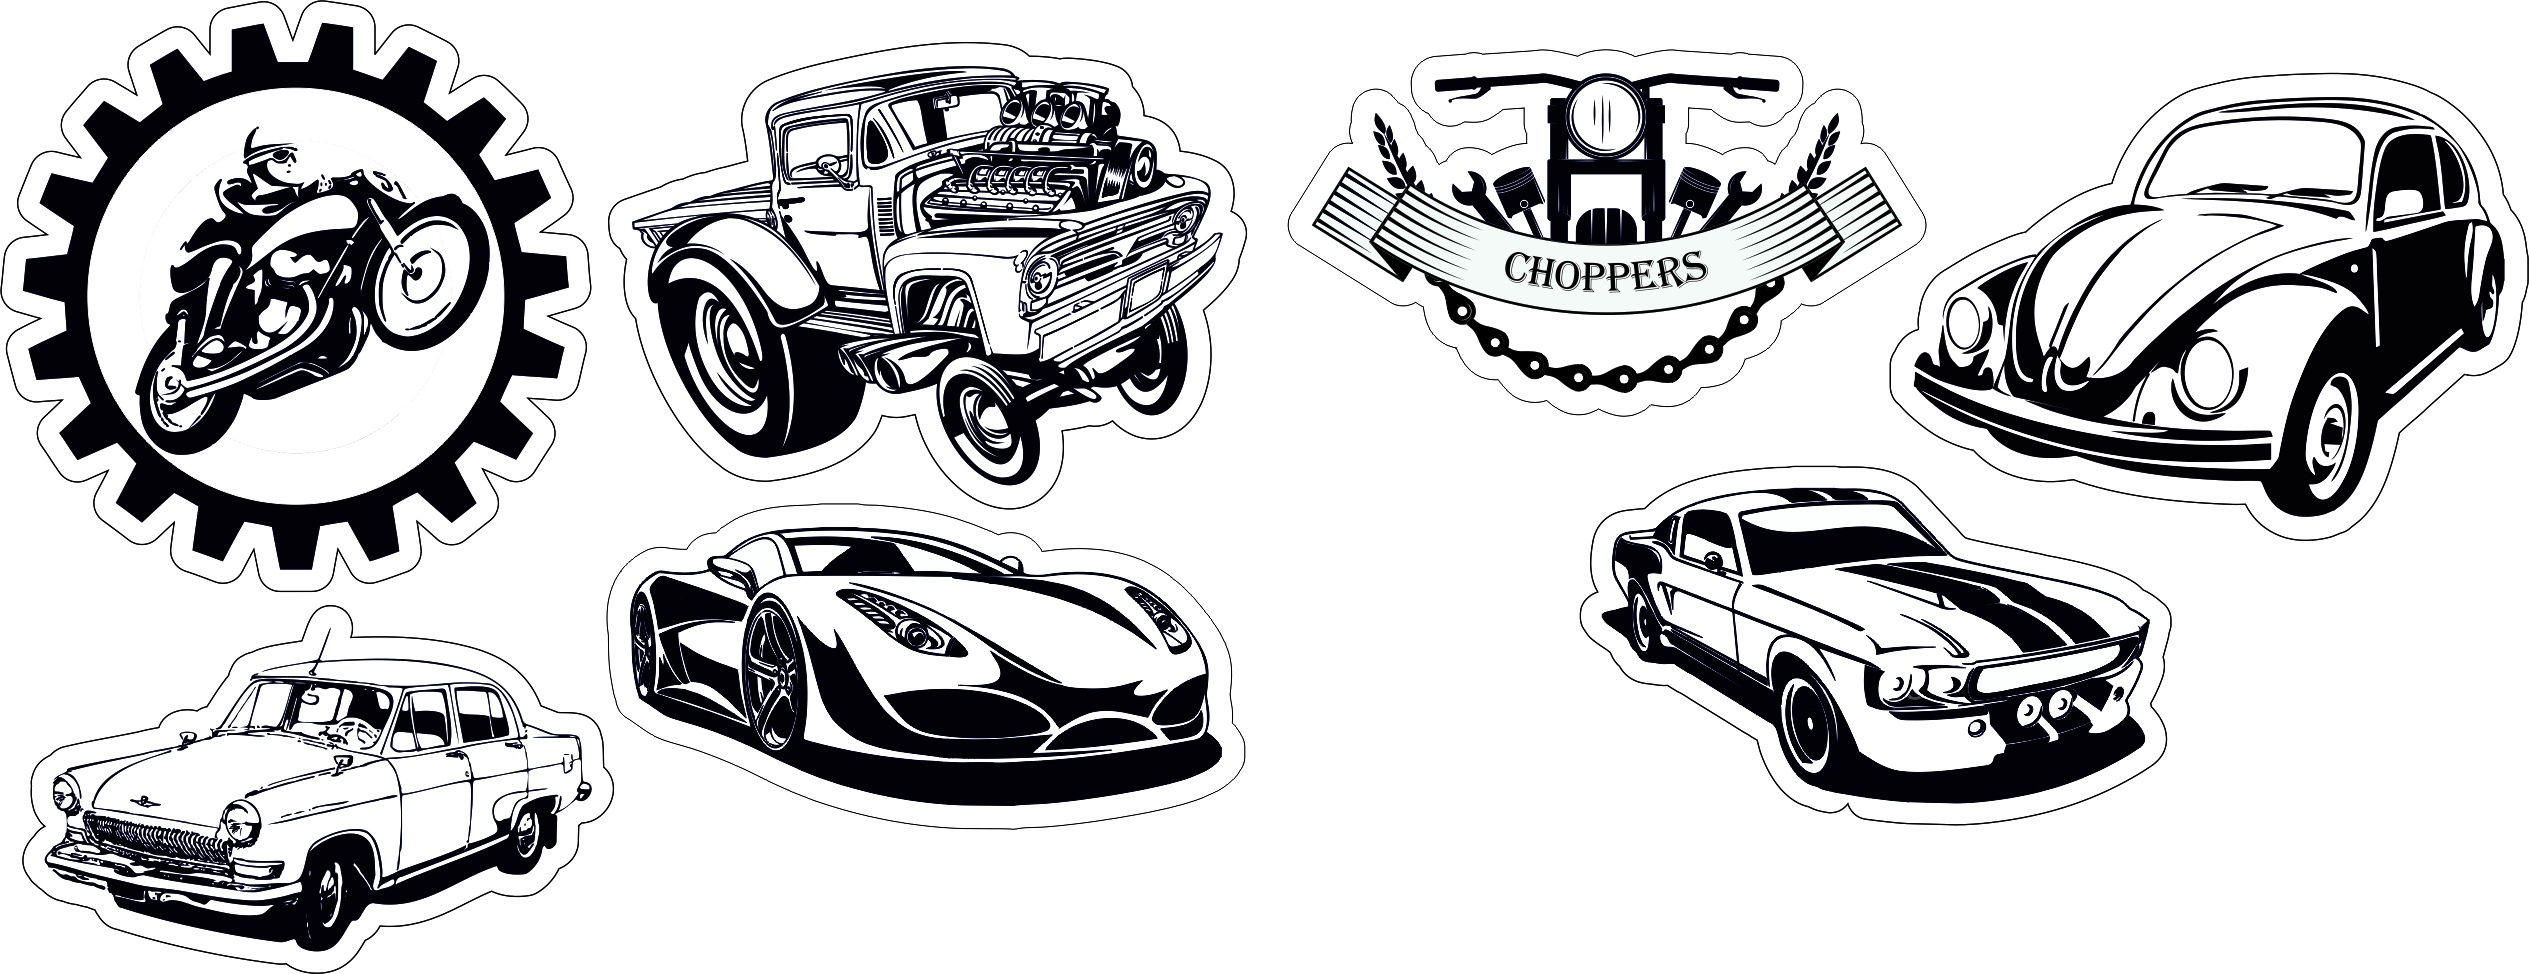 Vinyl Stickers on Car Vector Pack Free Vector cdr Download - 3axis.co